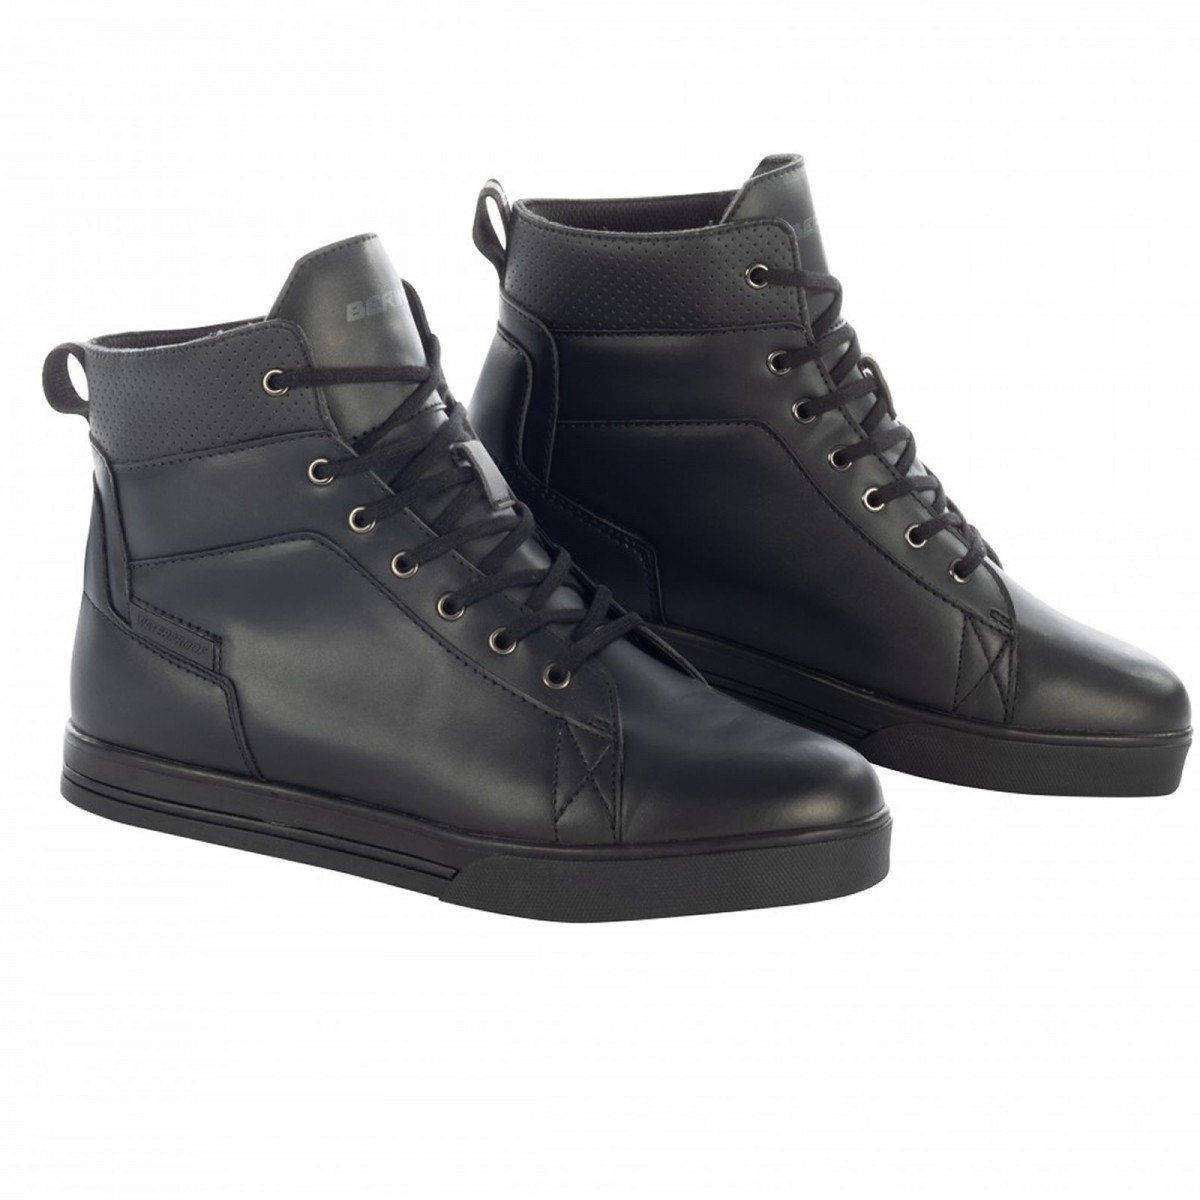 Image of EU Bering Indy Noir Chaussures Taille 44